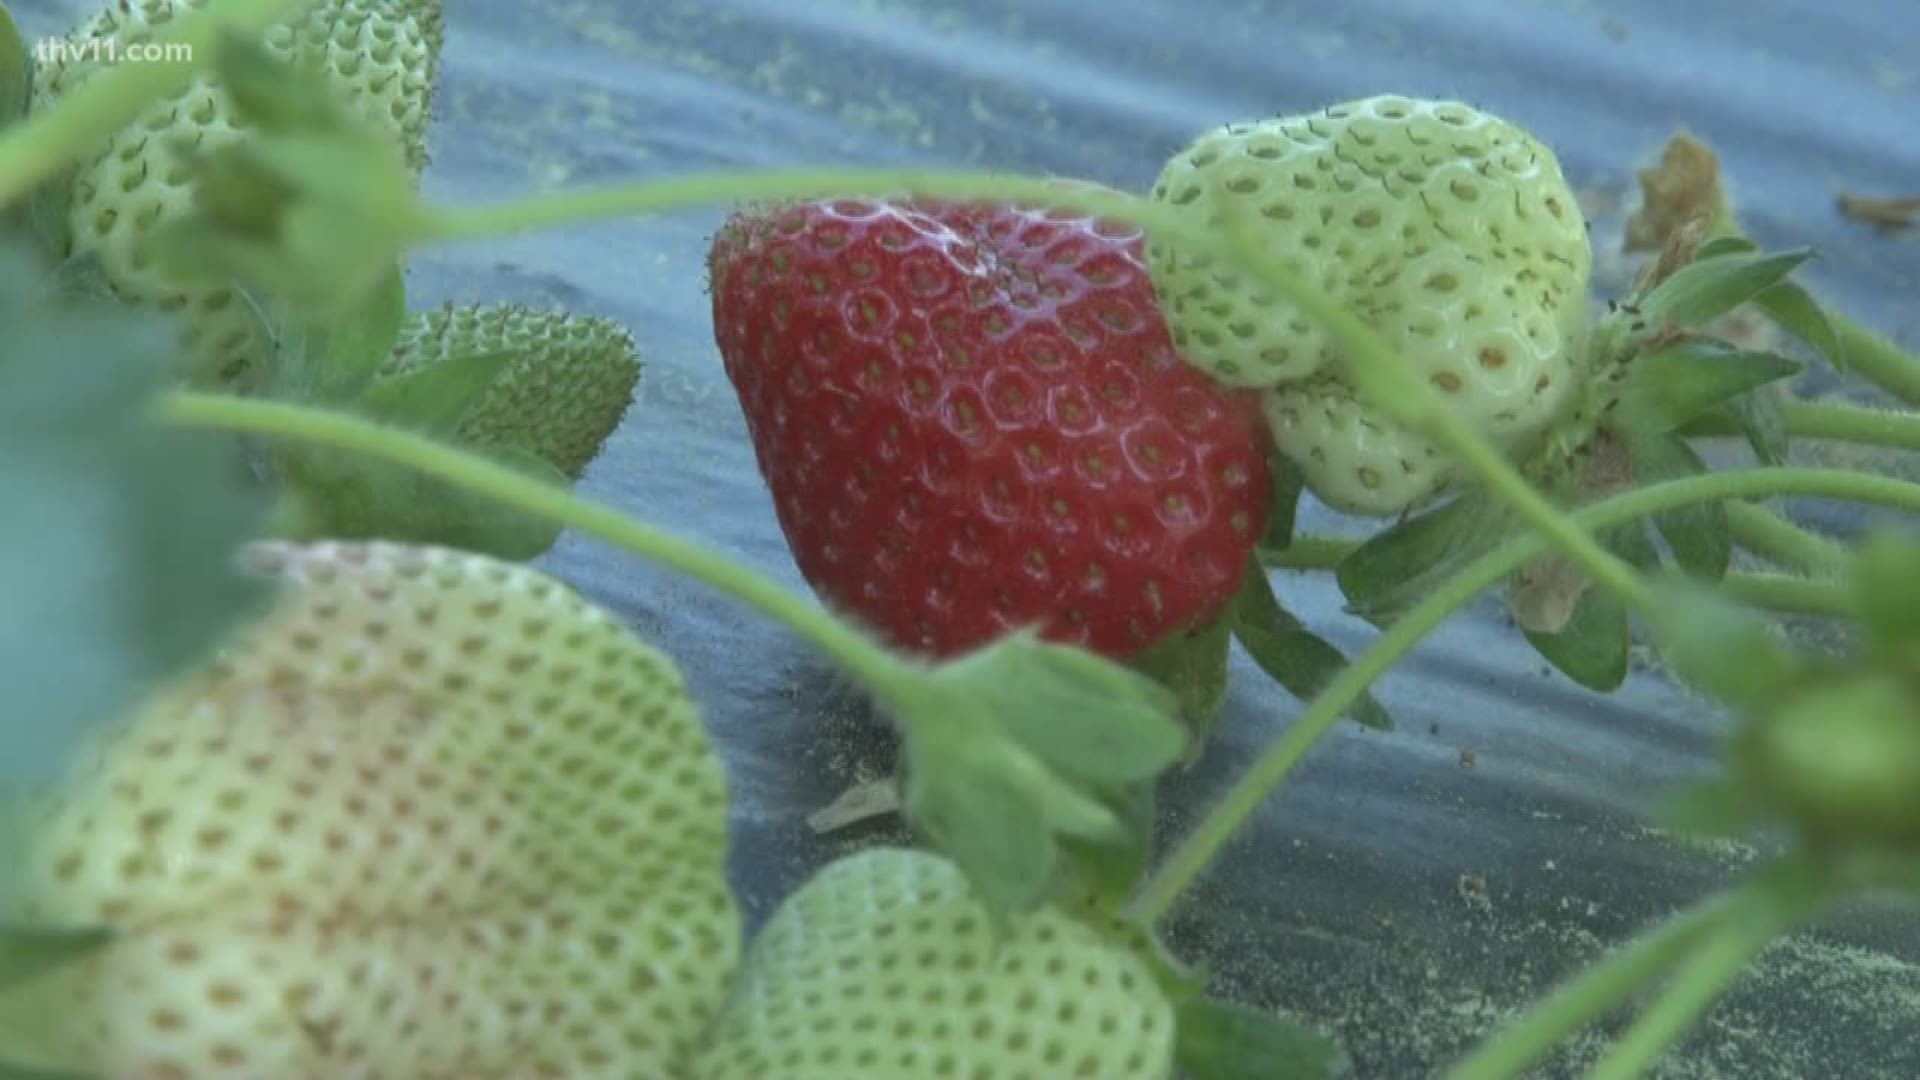 Arkansas strawberry farmers say it's almost time to start picking strawberries.